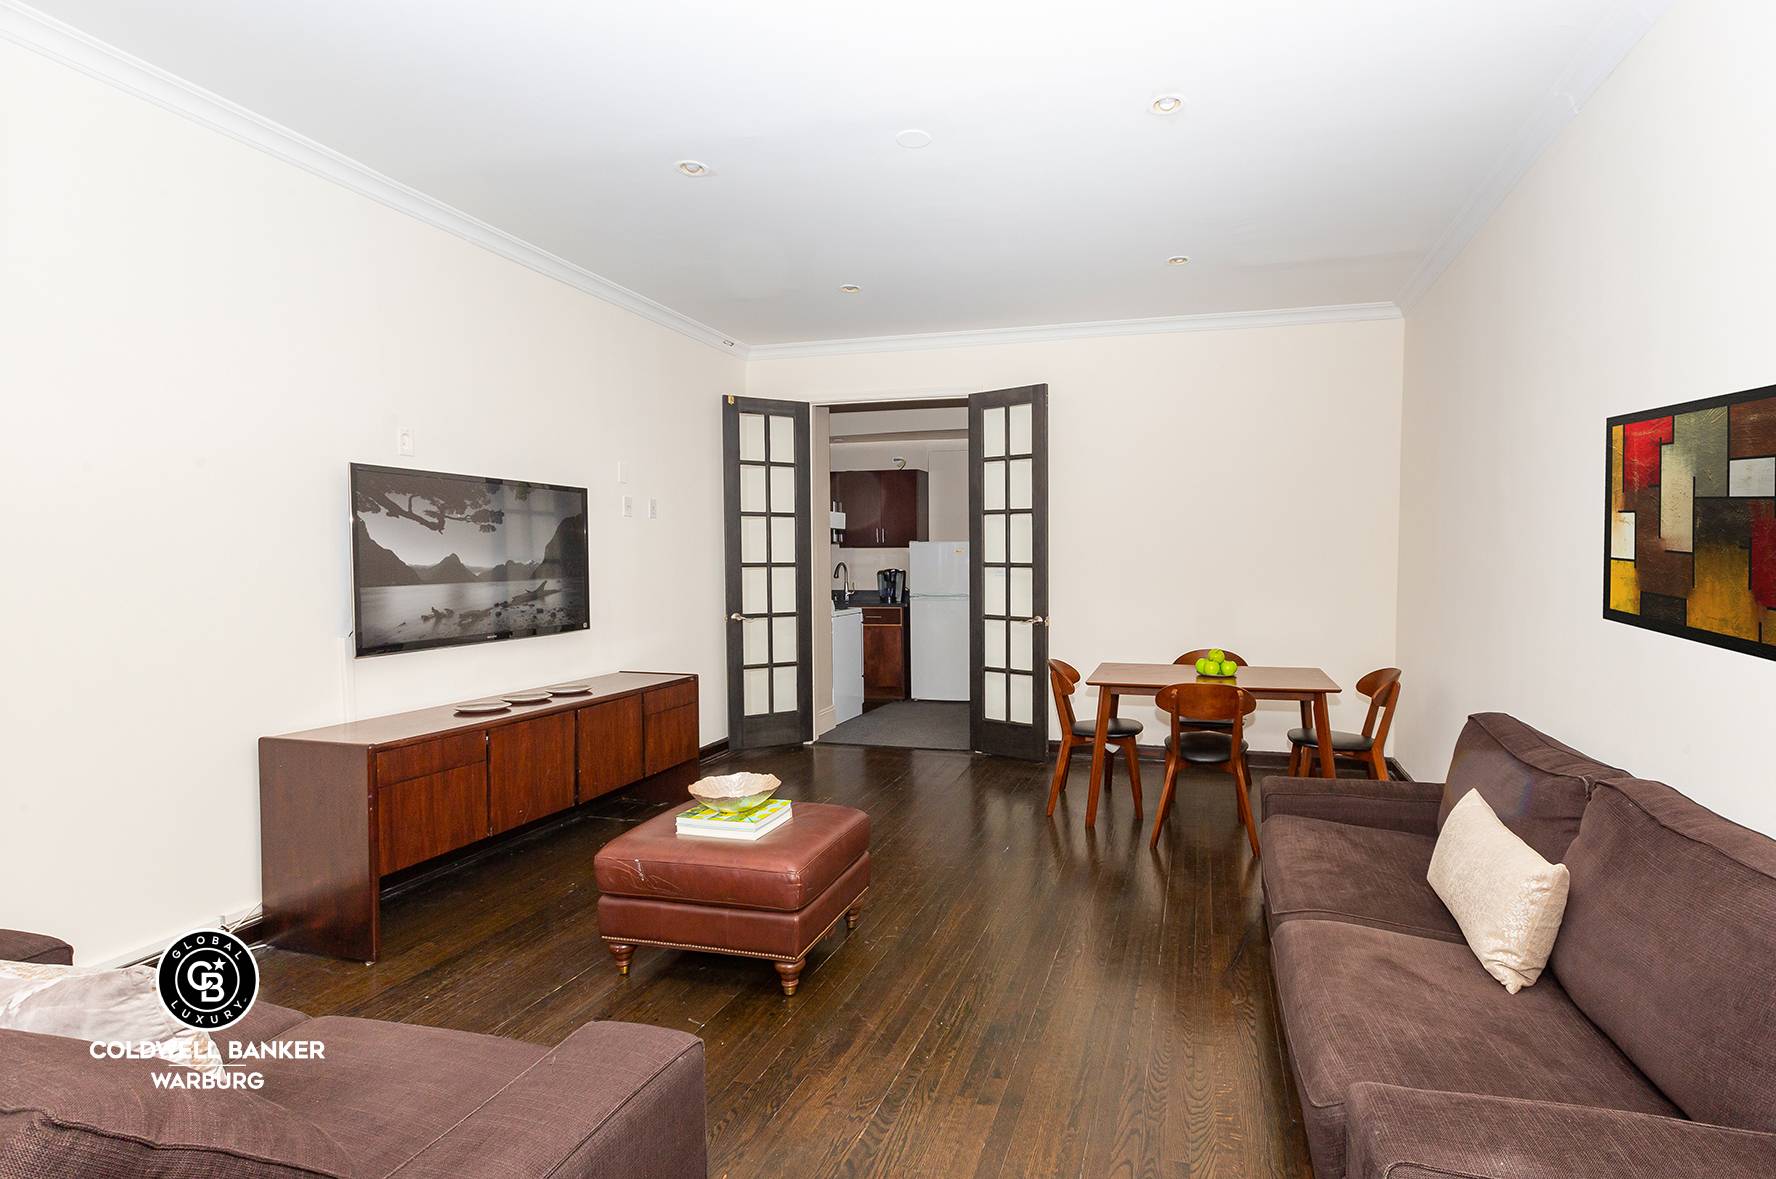 Expansive rooms with over nine foot ceilings, a private patio and an additional sunroom home office, make this spacious two bedroom, one bath Hell's Kitchen apartment unique in the neighborhood.